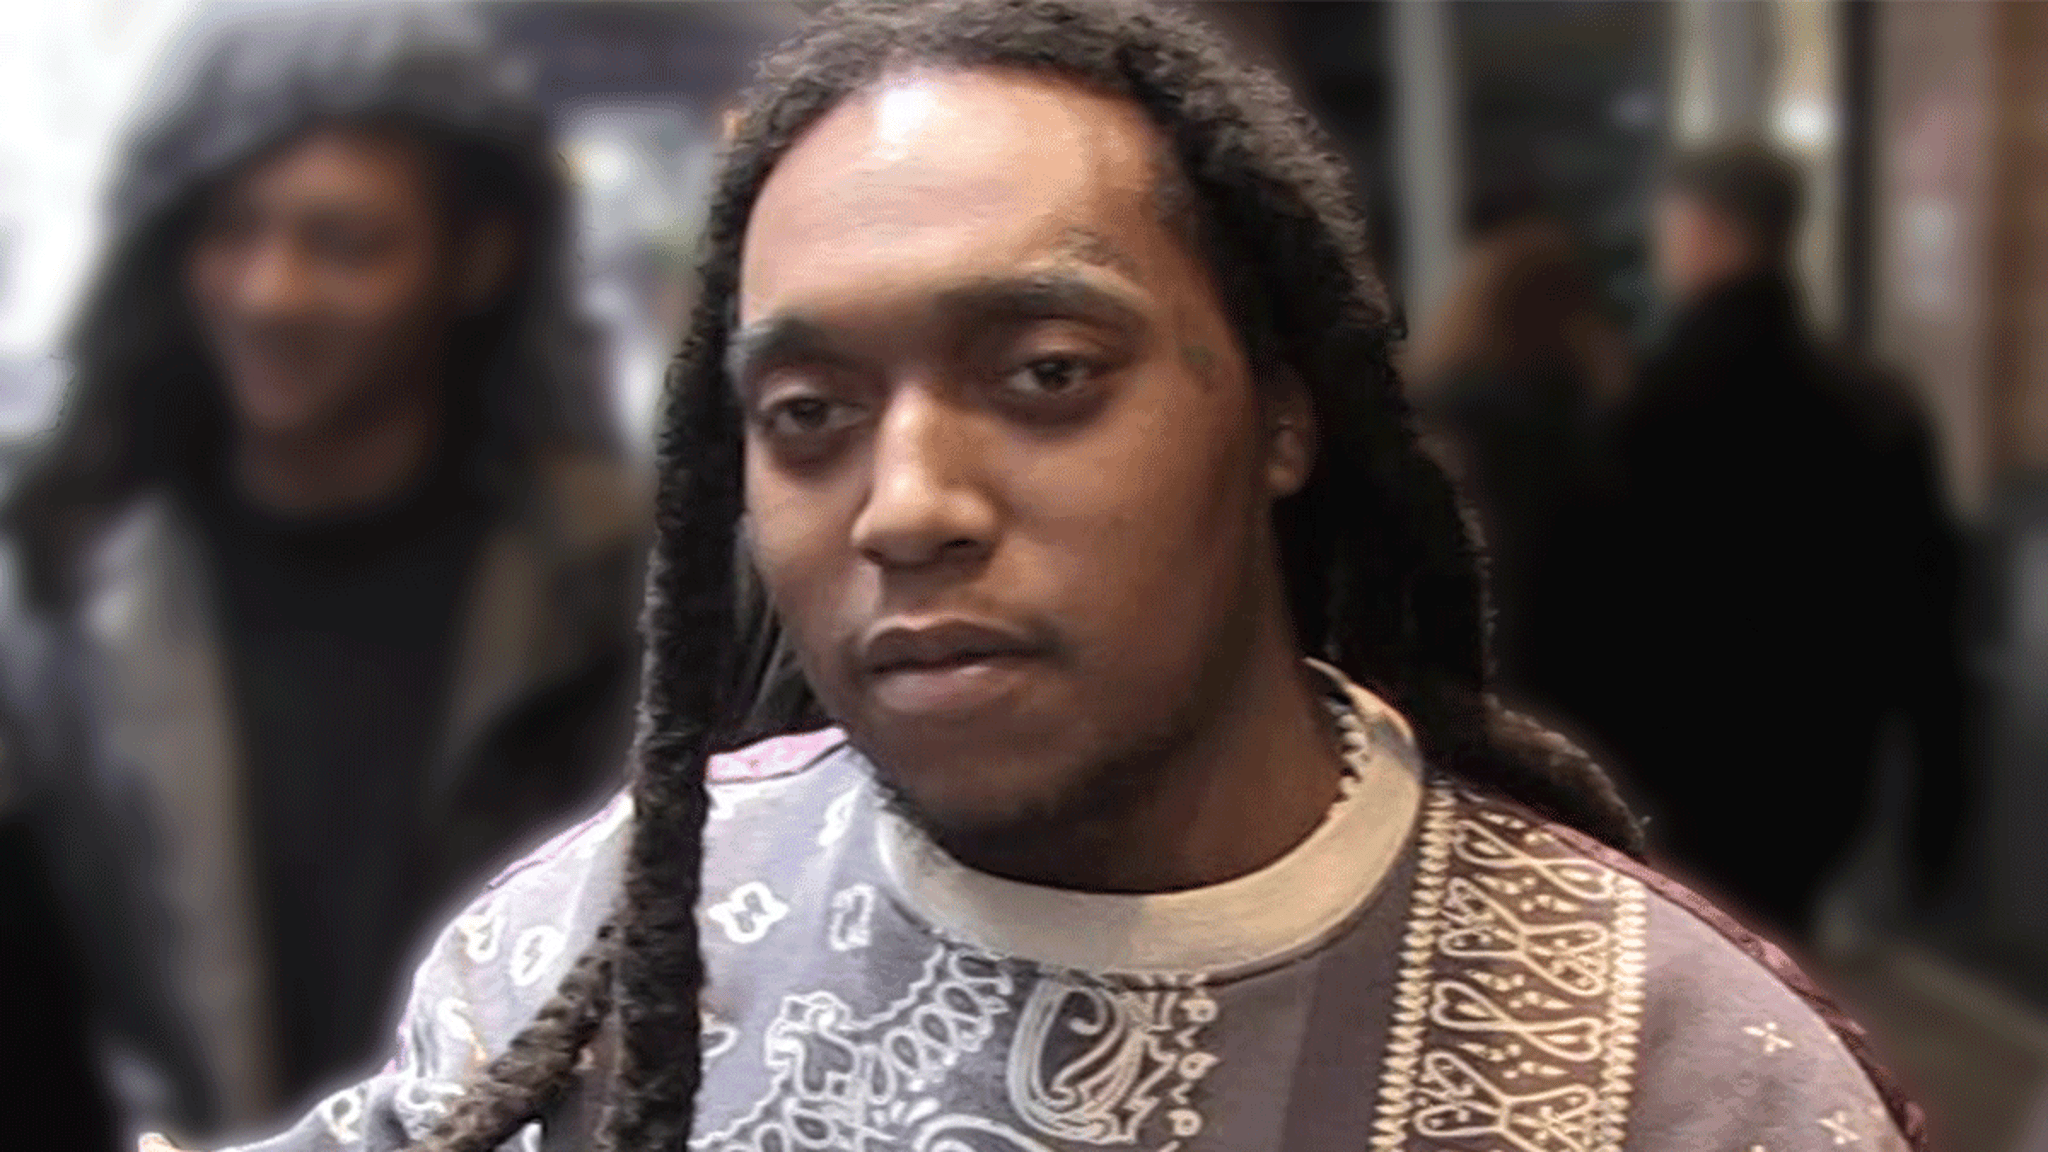 Takeoff's Alleged Murderer Requests Funds to Hire Private Investigator - TMZ : Takeoff's alleged murderer, Patrick Clark, is asking a judge for money ... because he says he can't afford a private investigator and needs one to build his defense.  | Tranquility 國際社群